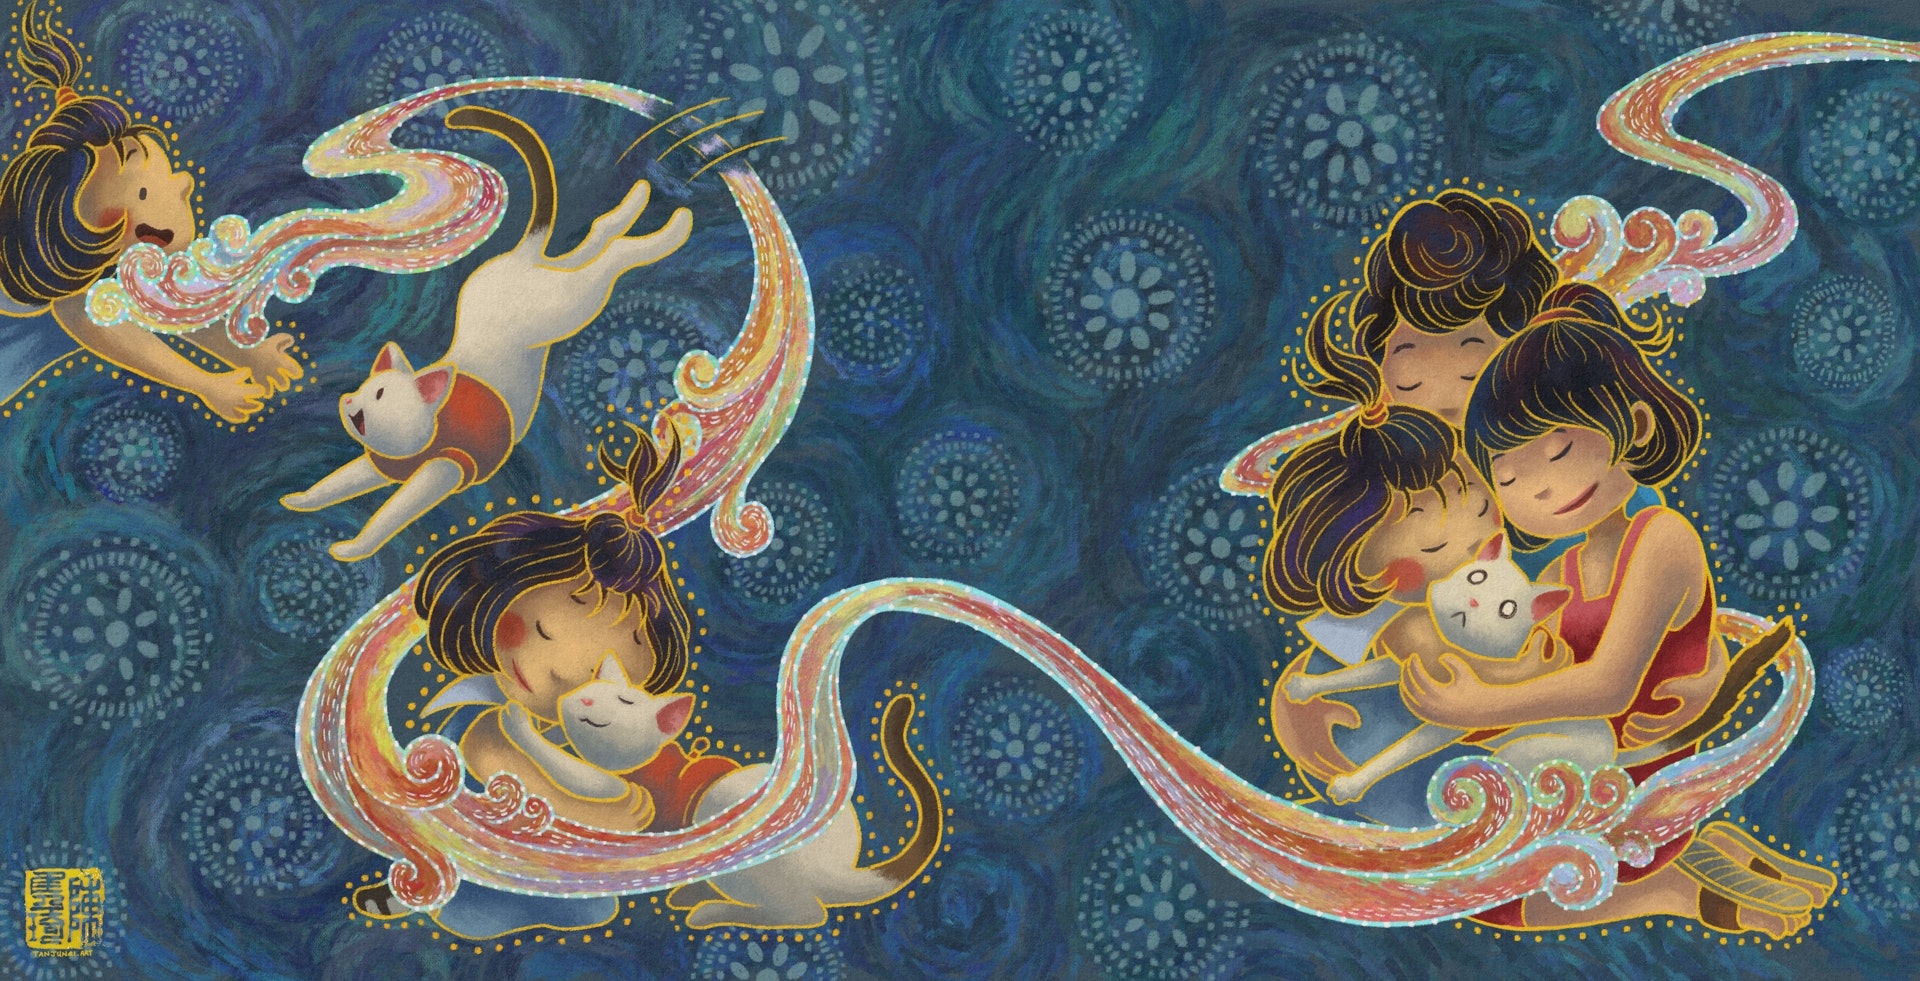 Digital painting with chalk texture and batik-inspired style and motifs, of a sequence of spot illustrations, against a background of dark blue with wavy textures and white circular batik motifs. In the first illustration a young girl with short, curly hair, some tied in a tuft above her head, is floating, following a cloud of scent, with arms outstretched as a white cat with a brown tail wearing a red harness comes bounding up joyfully towards her. In the second illustration, the girl kneels down in an embrace with the cat, while the scent cloud snakes around them, leading to the third illustration, where her mother and father also join in with the hug. The cat is a bit squeezed and uncomfortable.